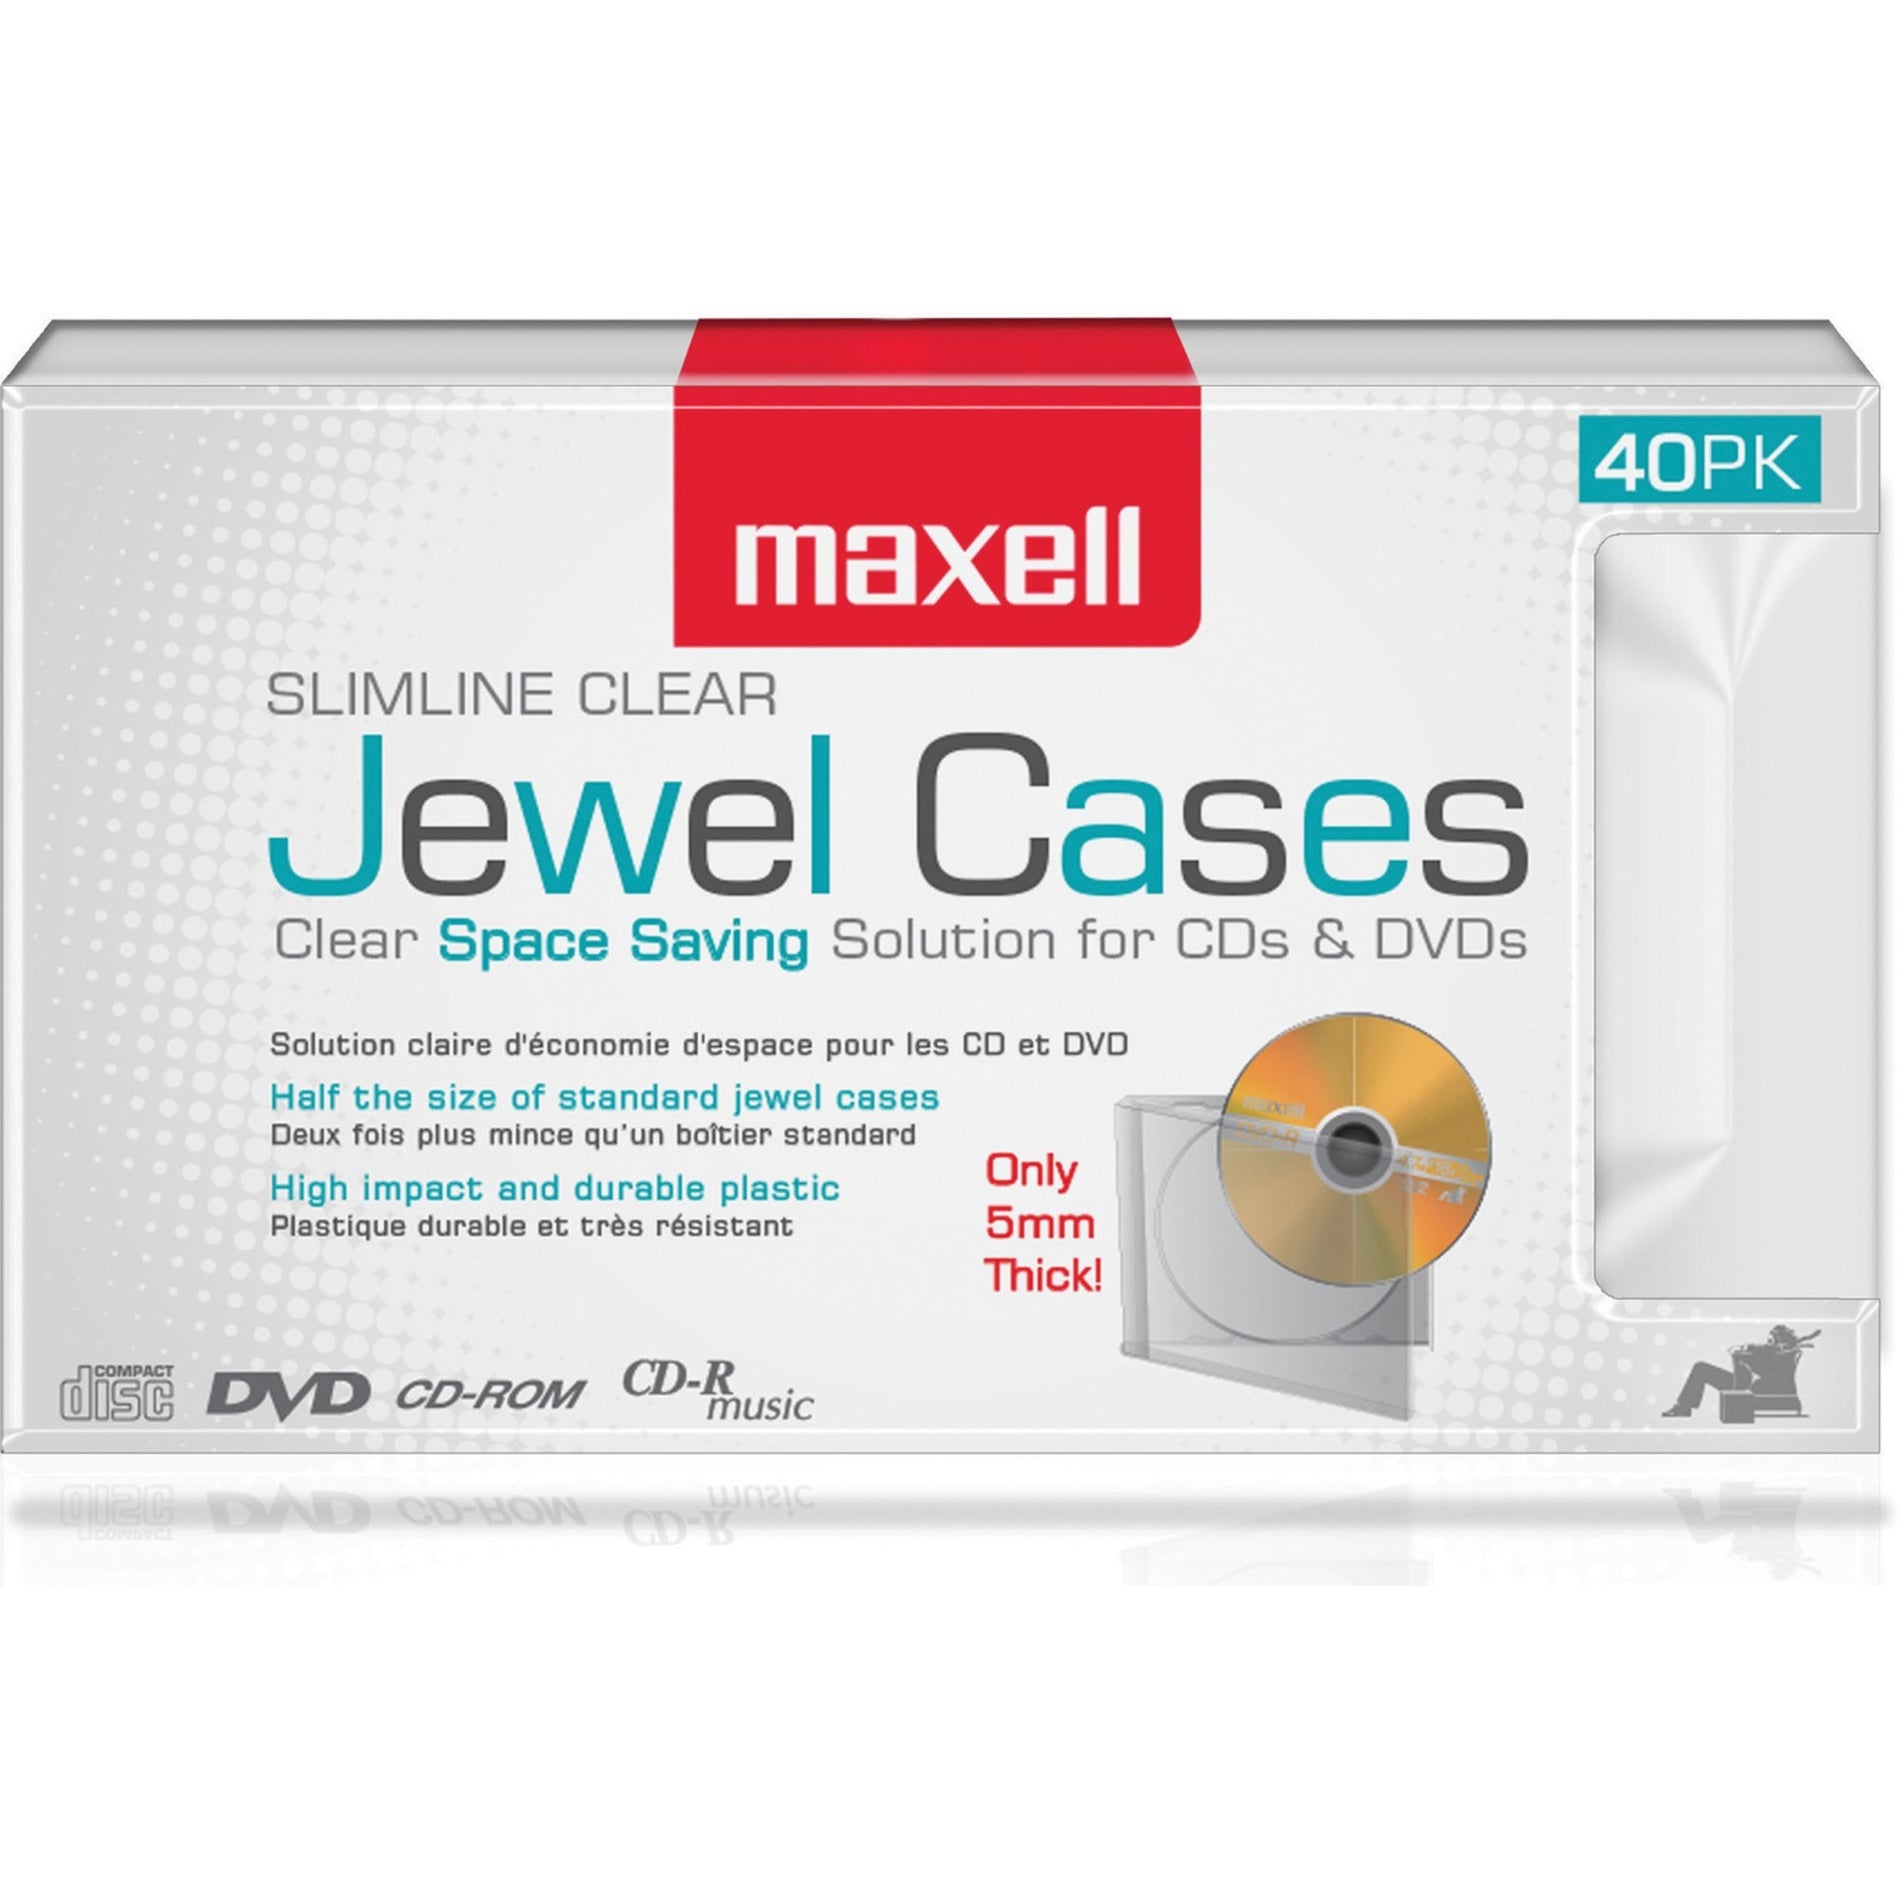 Maxell 190074OD Jewel Cases Slim Line - Clear (40 Pack)